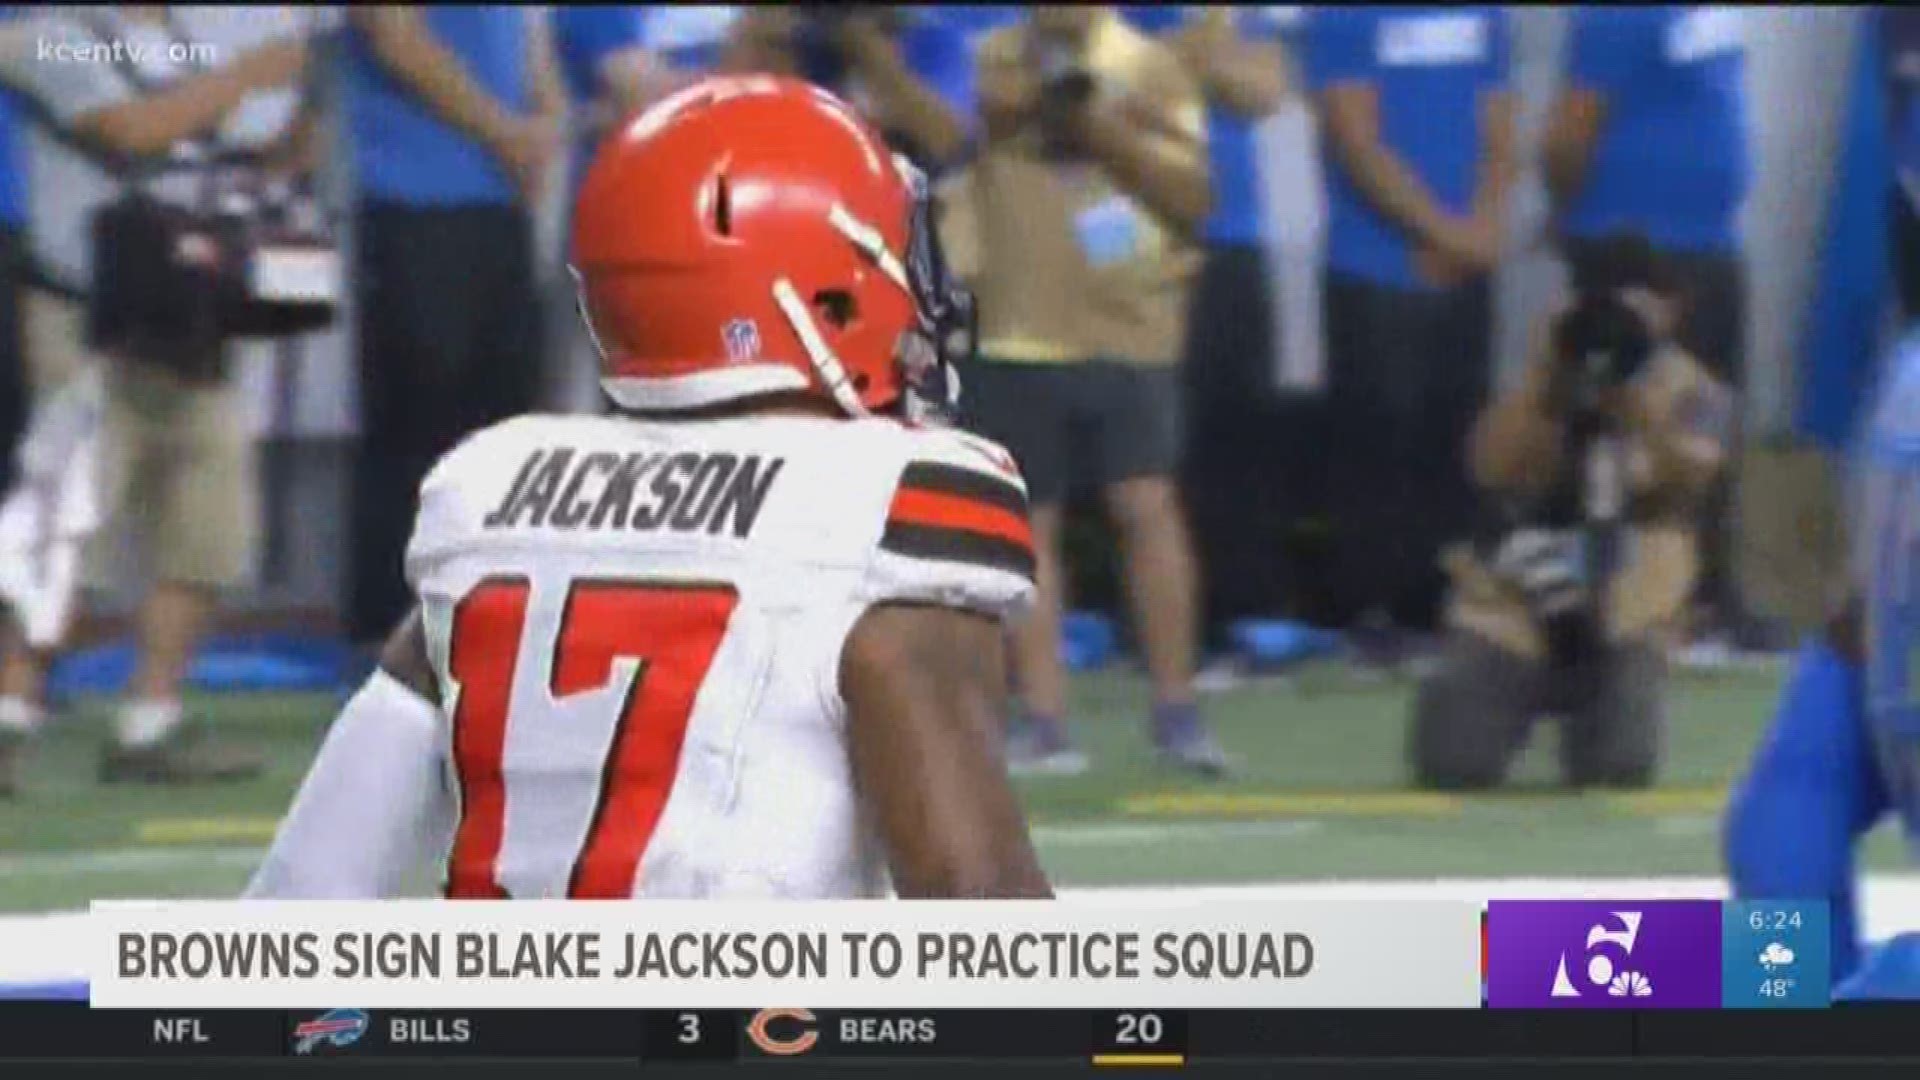 Cleveland Browns sign Blake Jackson to practice squad